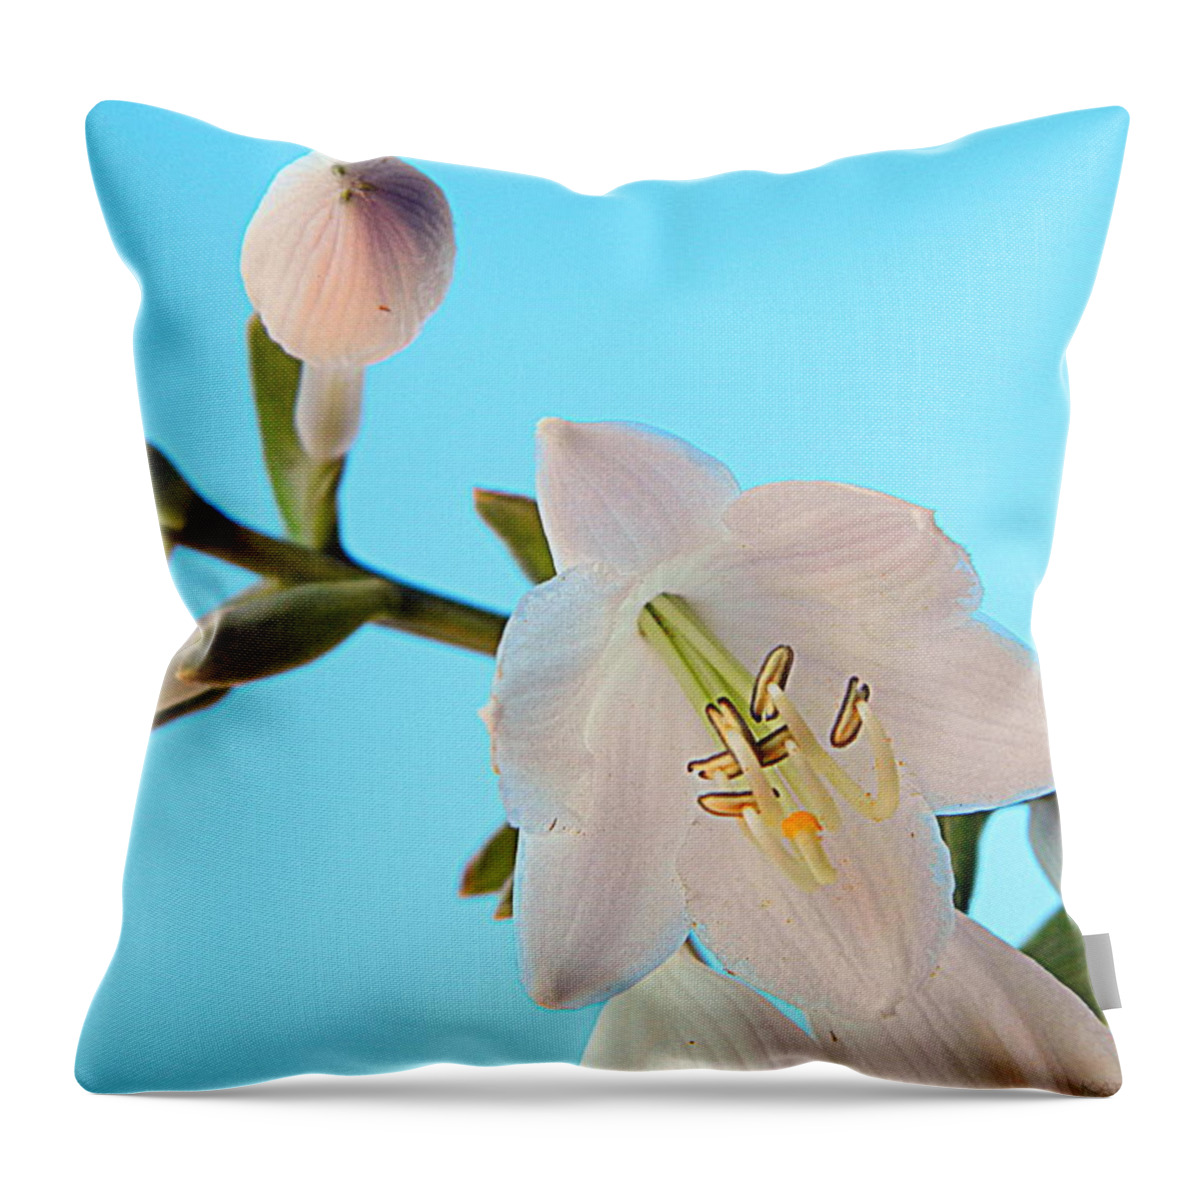 Bloom Throw Pillow featuring the photograph Blue Sky Hosta Beauty by Kathy Barney